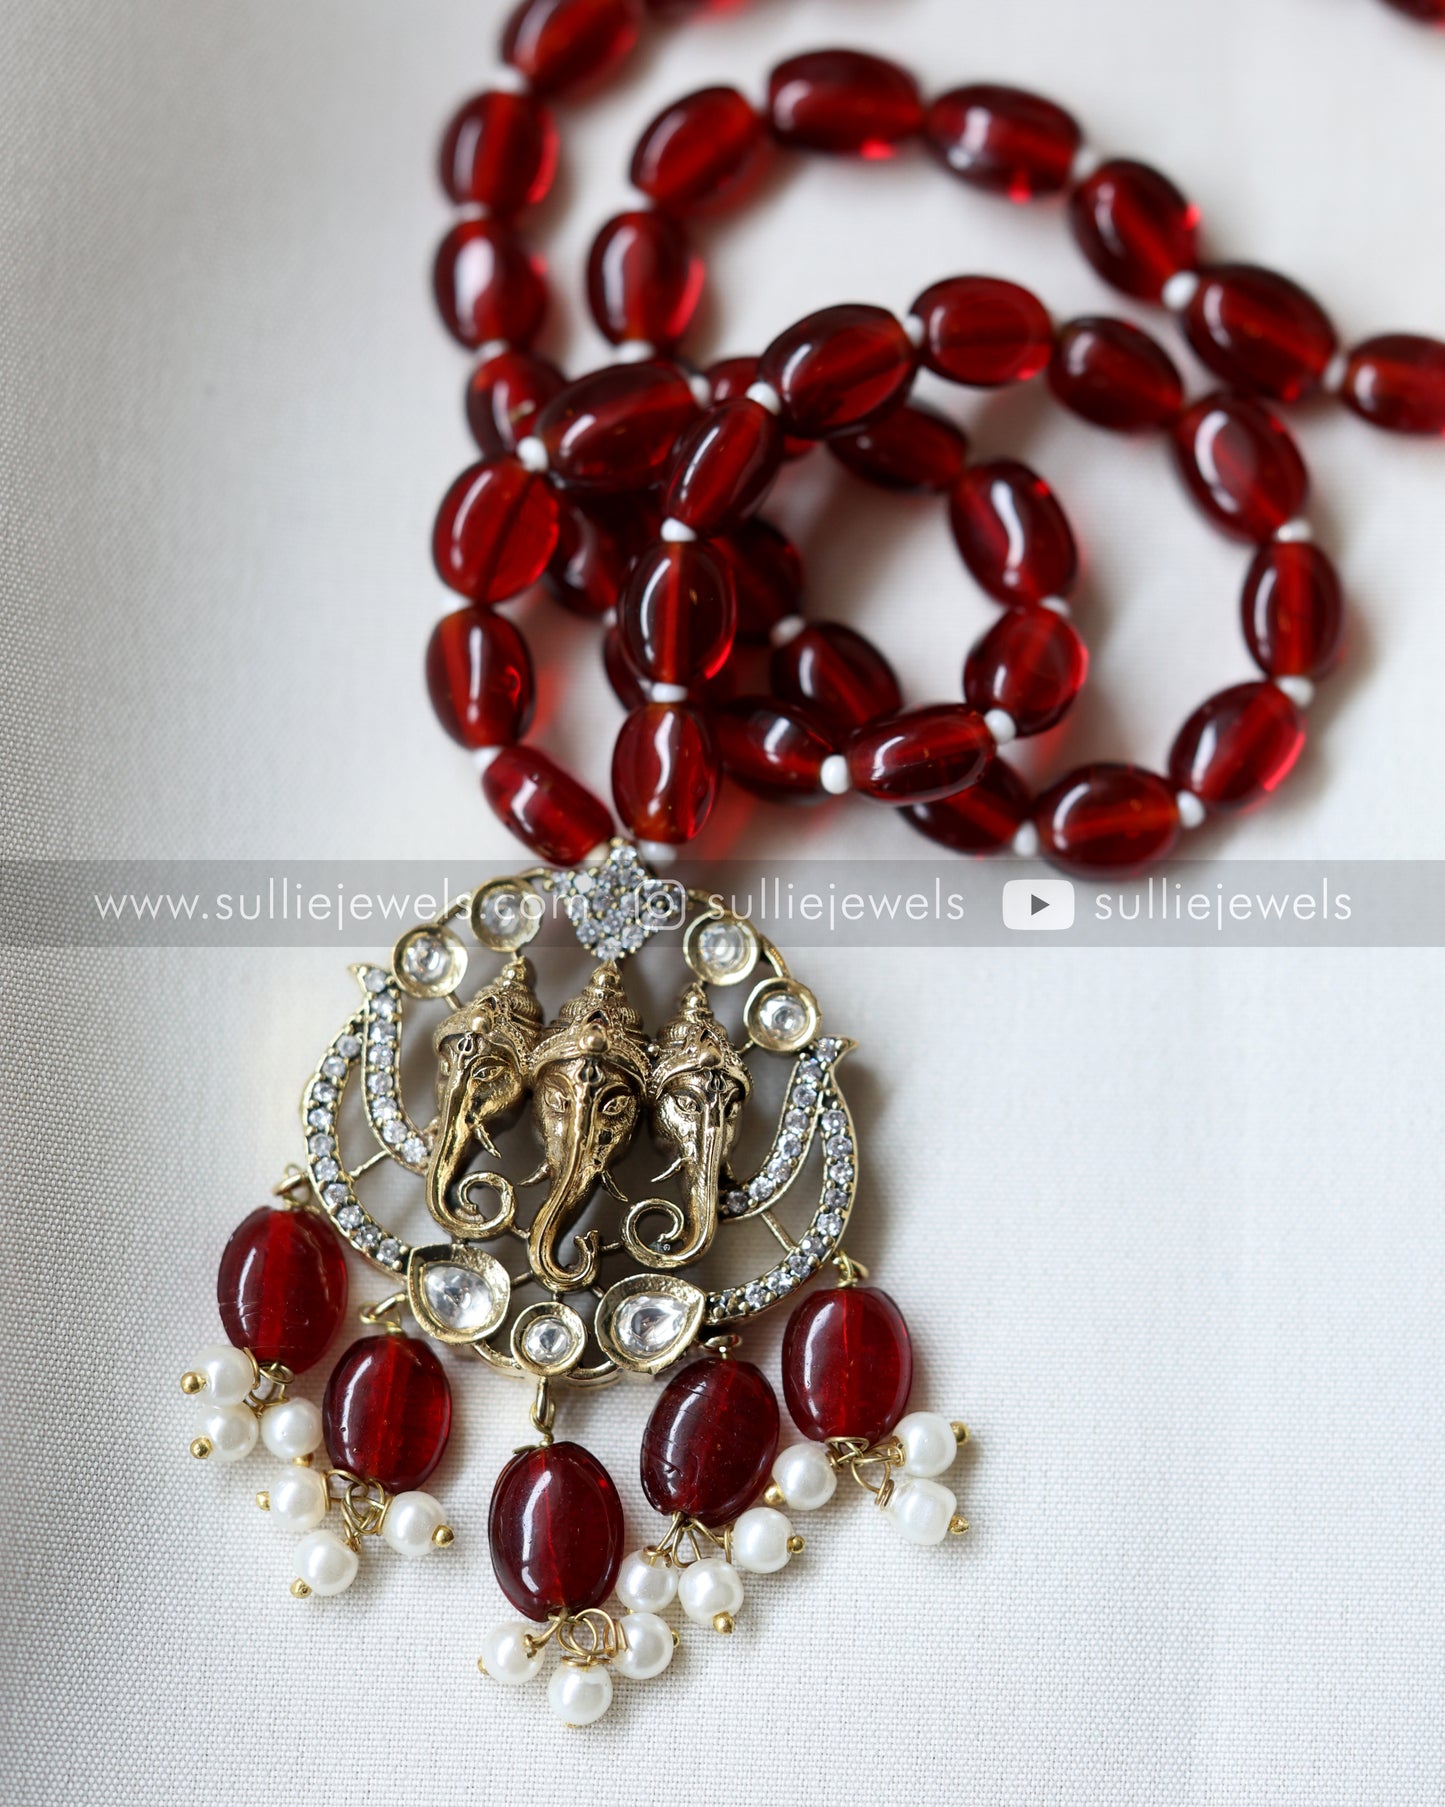 Tri-Mukha Ganapathy Bead Pendant with earring